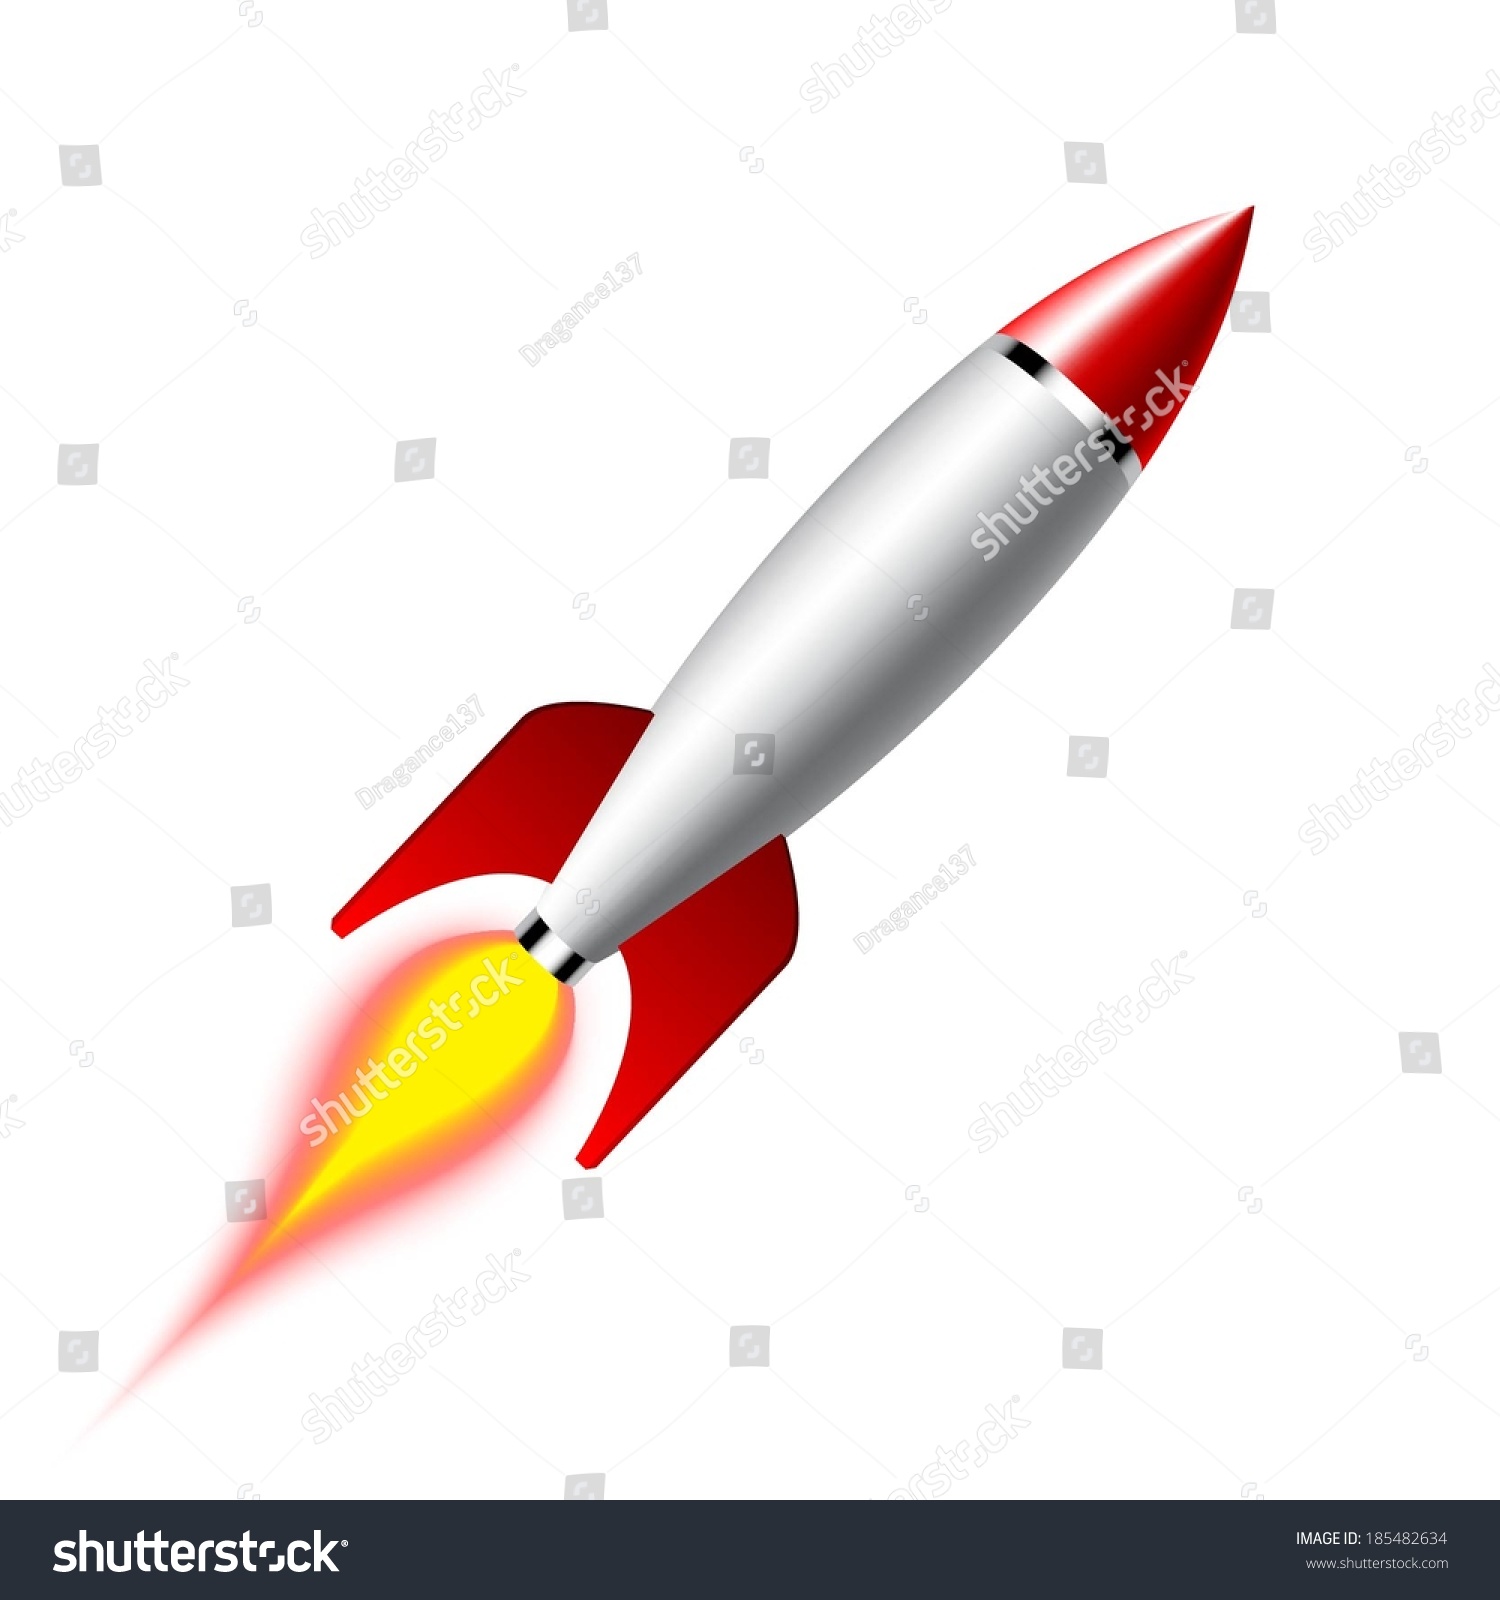 Download 3d Vector Rocket Isolated On White Stock Vector 185482634 - Shutterstock